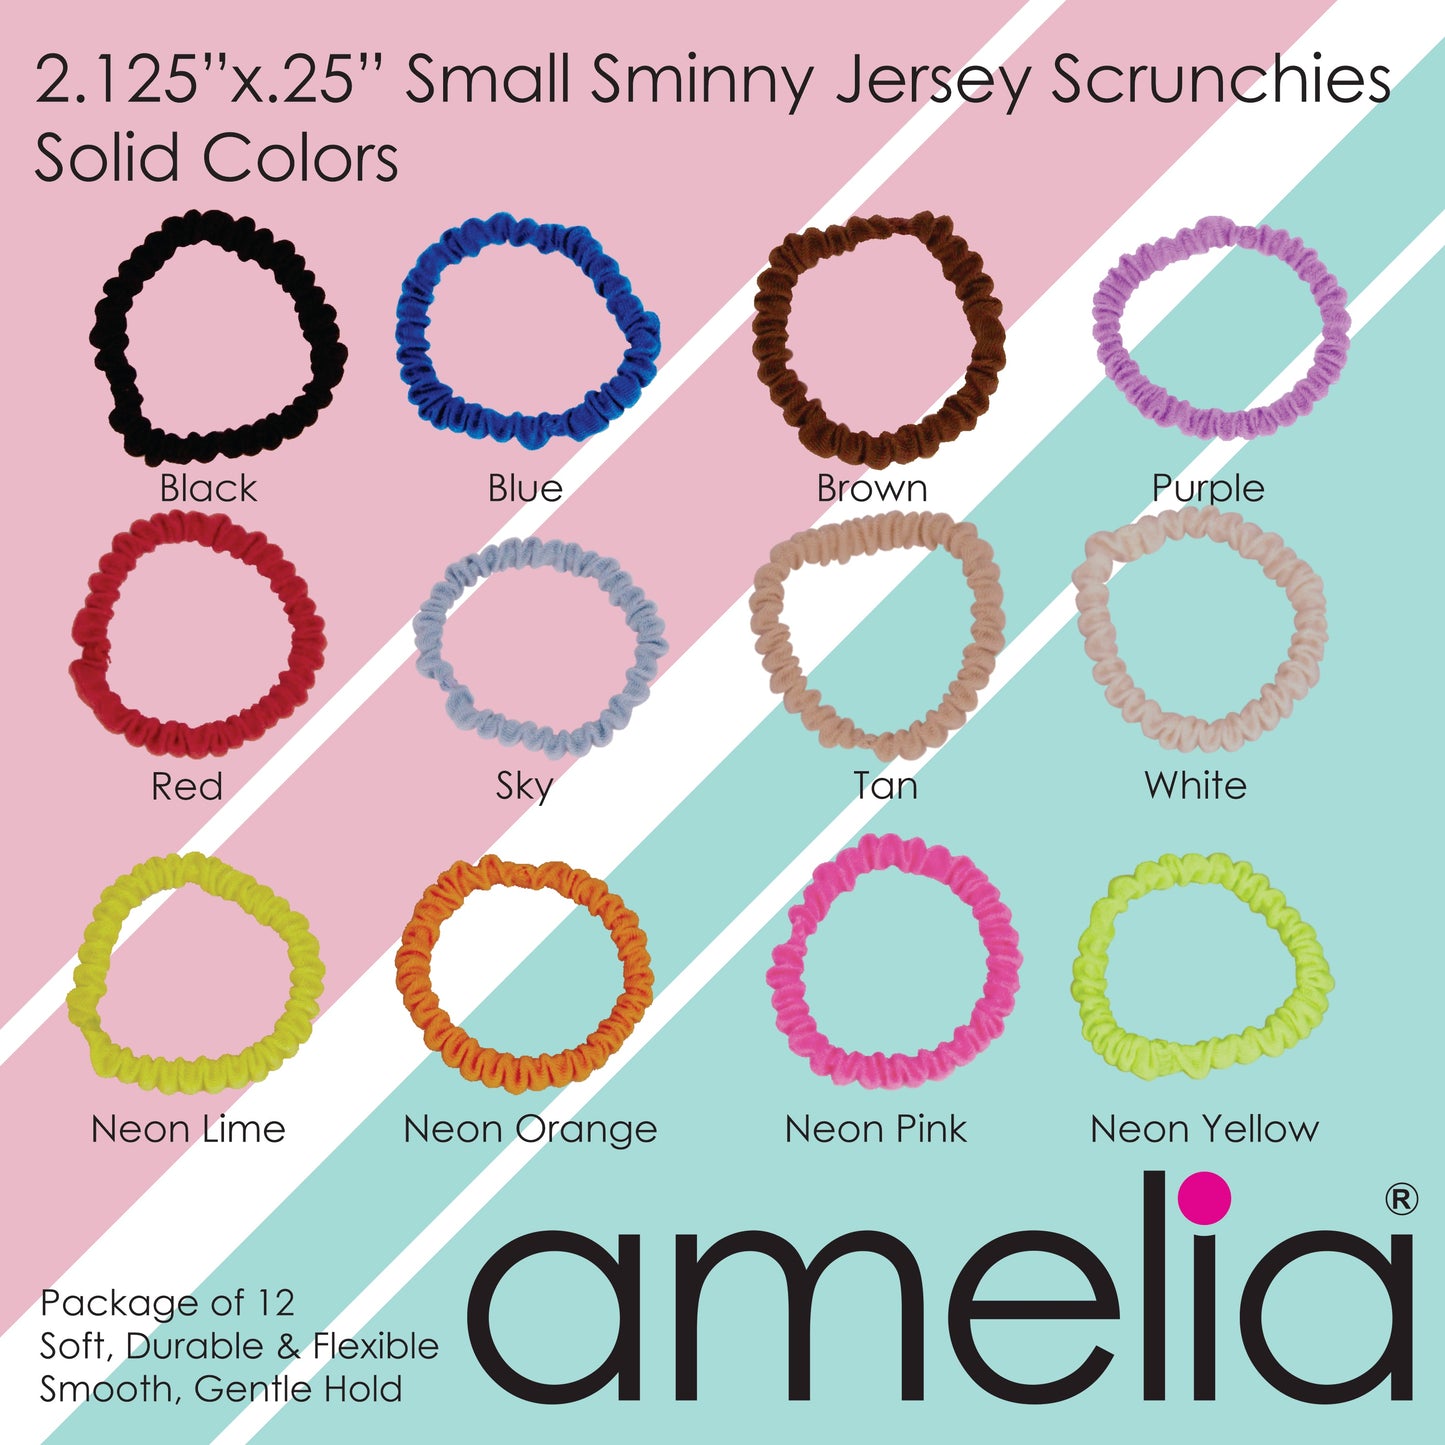 Amelia Beauty, Blue Skinny Jersey Scrunchies, 2.125in Diameter, Gentle on Hair, Strong Hold, No Snag, No Dents or Creases. 12 Pack